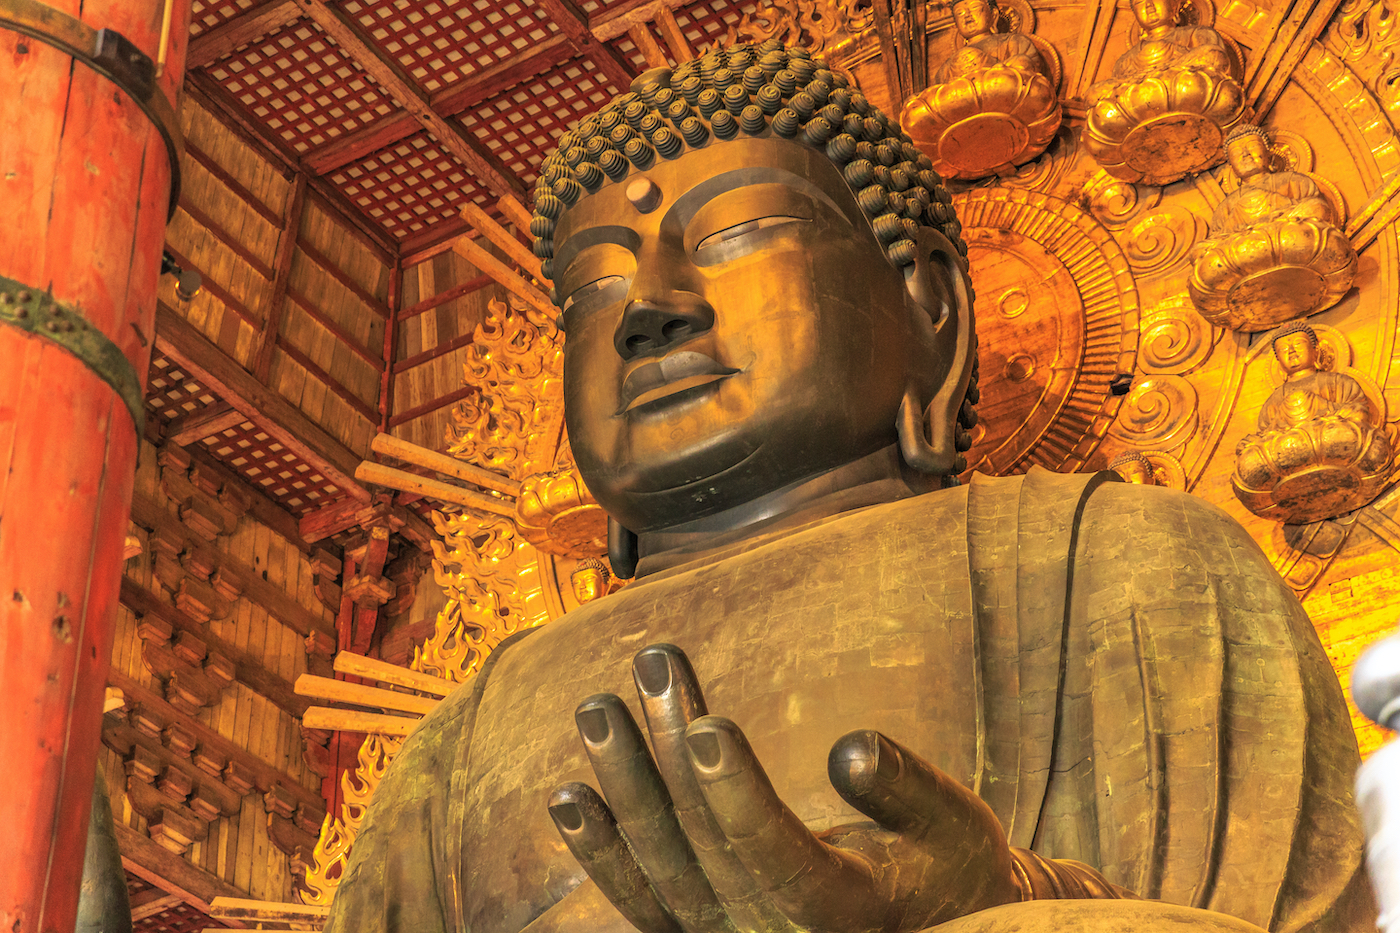 Nara, Japan - April 26, 2017: Details of Great Buddha or Daibutsu, the world's largest bronze statue of Buddha Vairocana. Todai-ji a Buddhist Temple in Nara, Japan. The Great Buddha was built in prayers of solacing people's hearts under the condition of natural disasters.